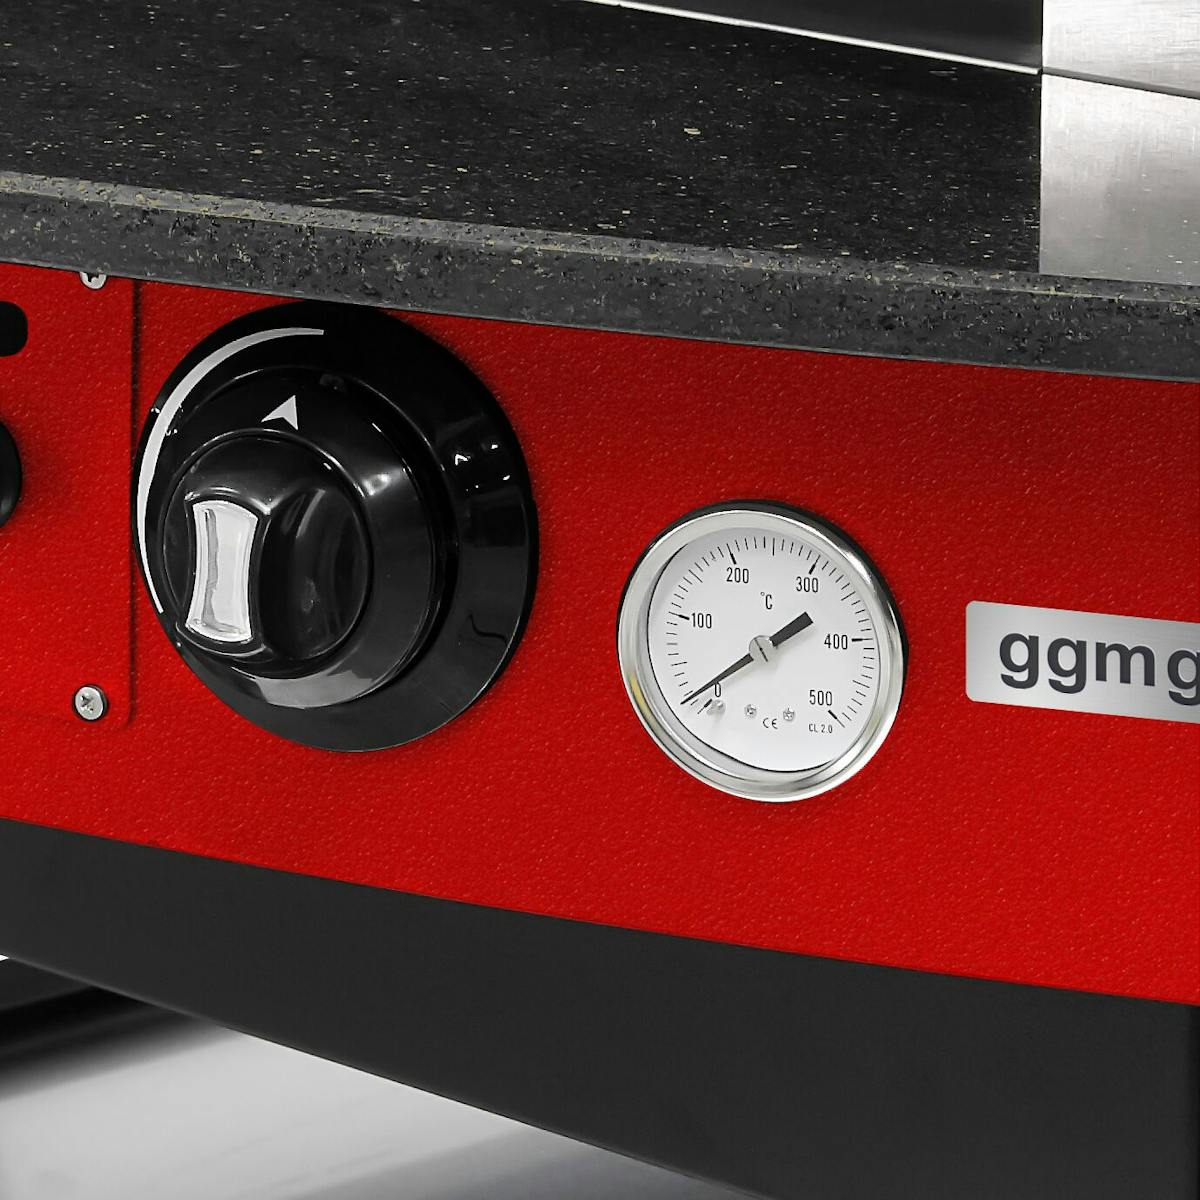 Gas pizza oven - Red - 9x 25cm - Manual